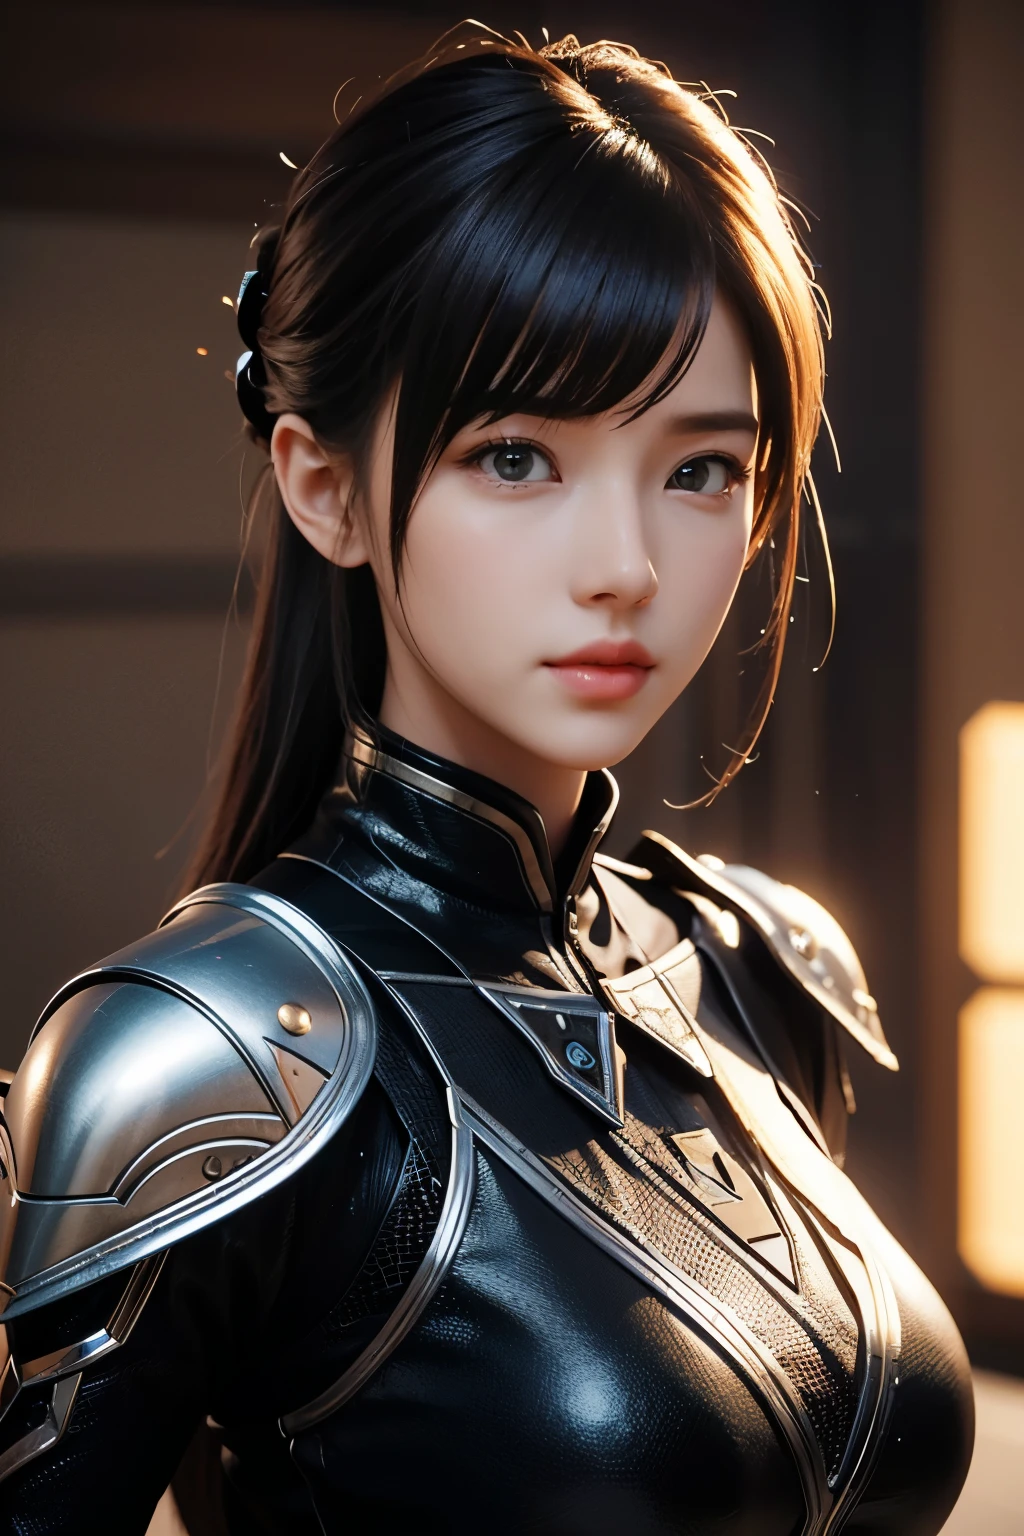 Game art，The best picture quality，Highest resolution，8k，((A bust photograph))，((Portrait))，(Rule of thirds)，Unreal Engine 5 rendering works， (The Girl of the Future)，(Female Warrior)，22-year-old girl，(Hair random)，(A beautiful eye full of detail)，(Big breasts)，Elegant and charming，Smile，(frown)，(Clothes full of futuristic sci-fi style，Sweater，A delicate pattern，Glittering jewels，Armor，White and red)，Cyberpunk Characters，Future Style， Photo poses，Street background，Movie lights，Ray tracing，Game CG，((3D Unreal Engine))，oc rendering reflection pattern